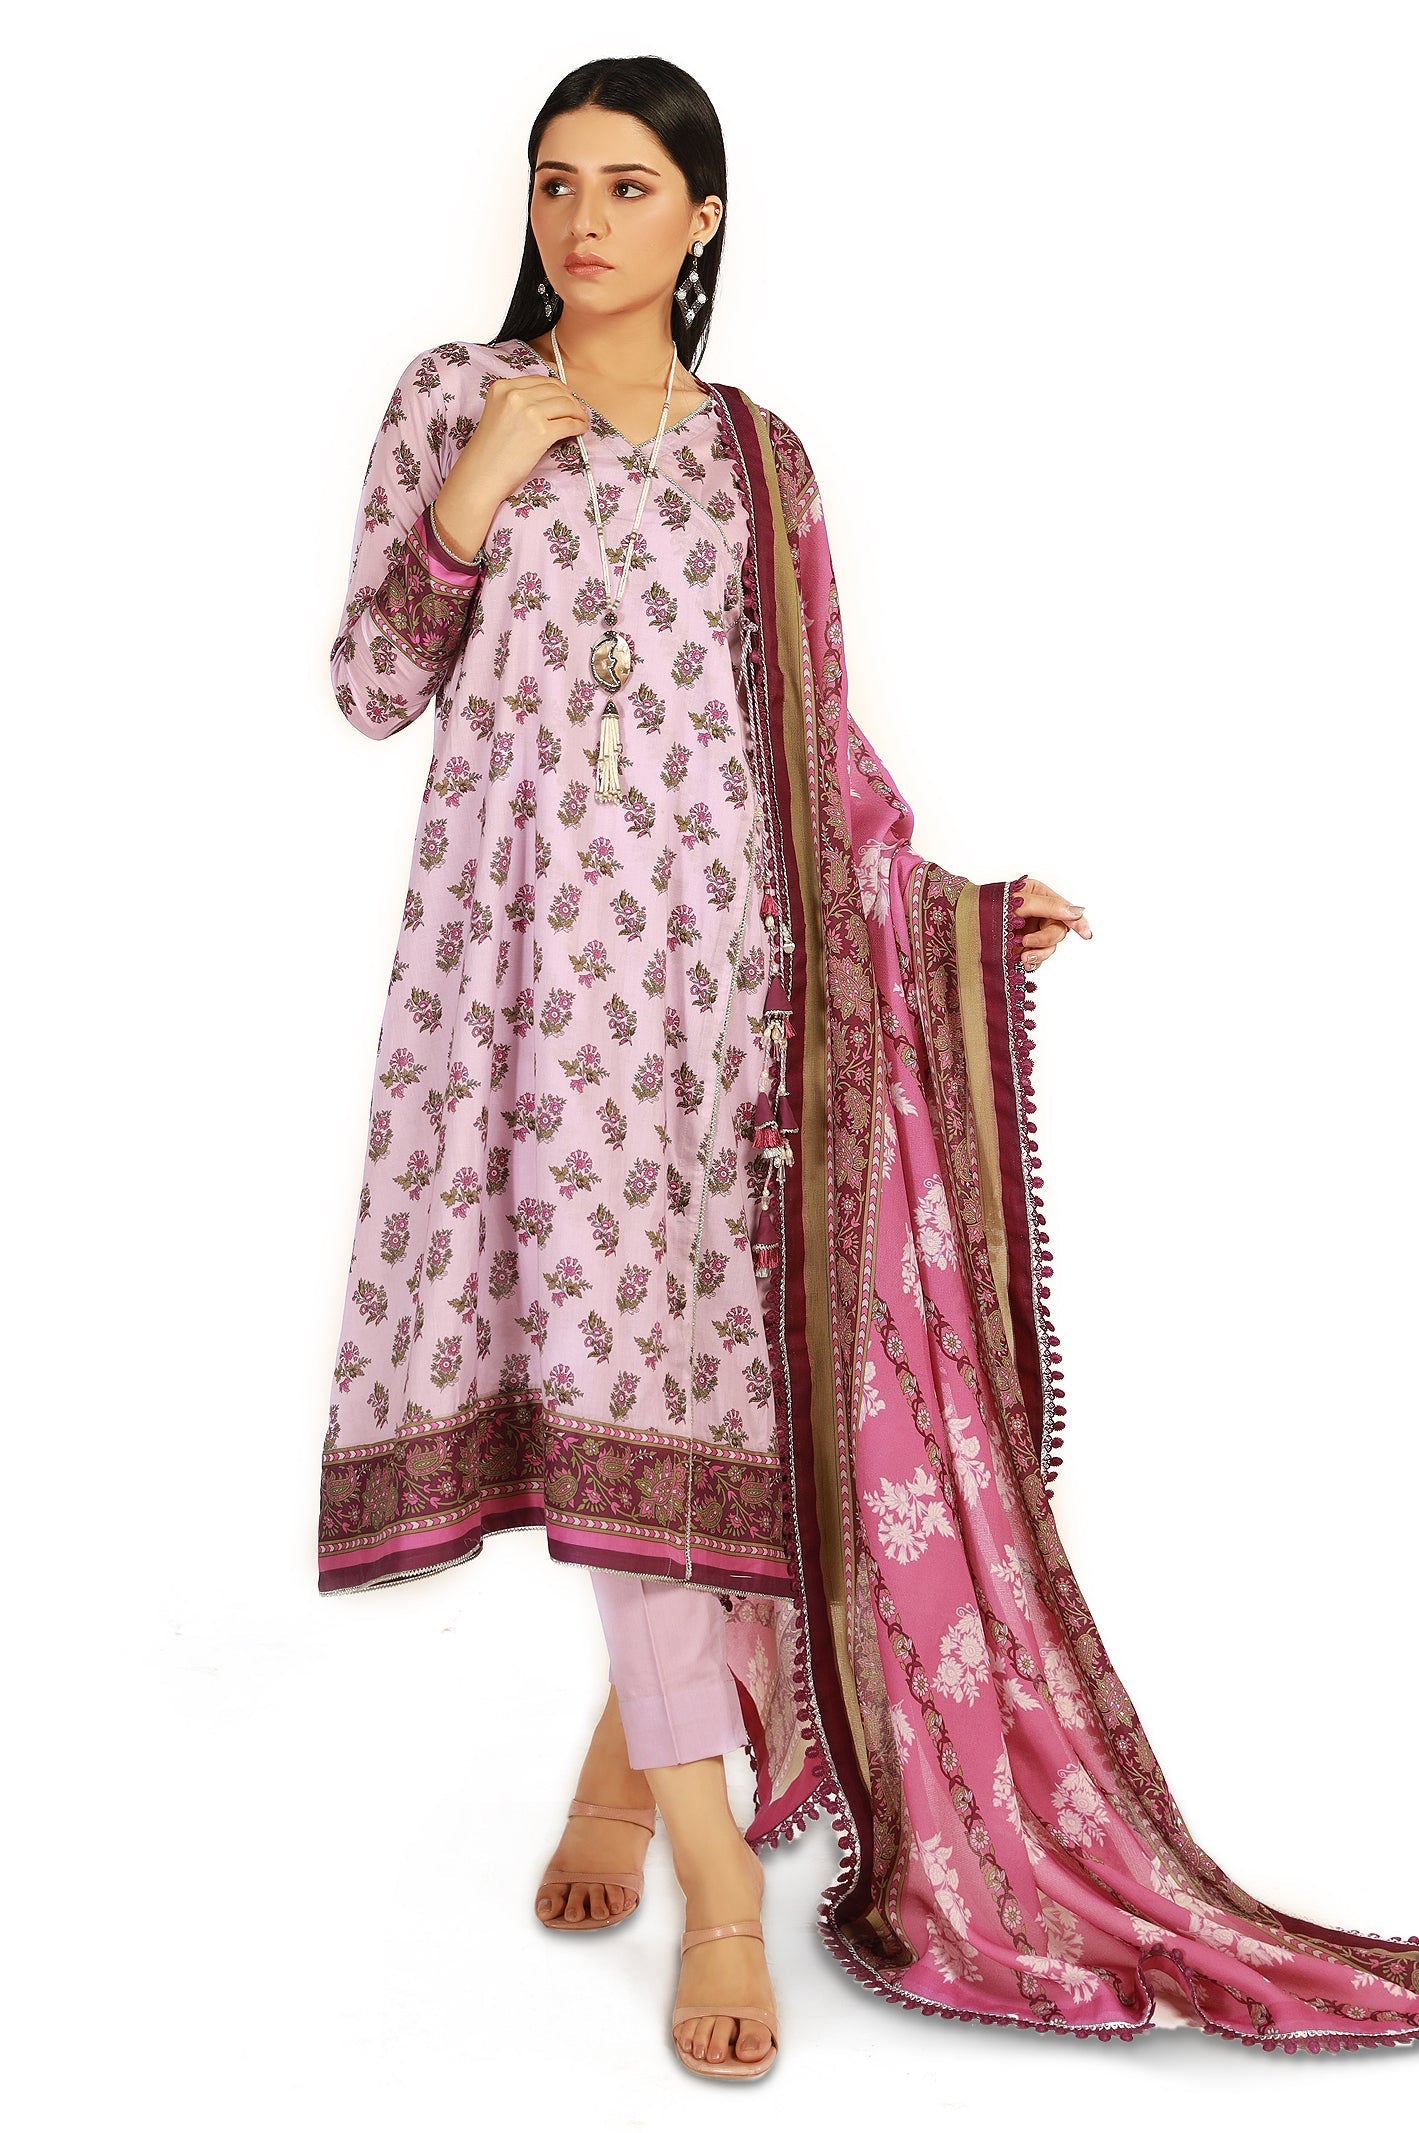 Unstitched 3 Piece Lawn Printed Shirt, Printed Tennis Net Dupatta and Cotton Dyed Trouser - Diners